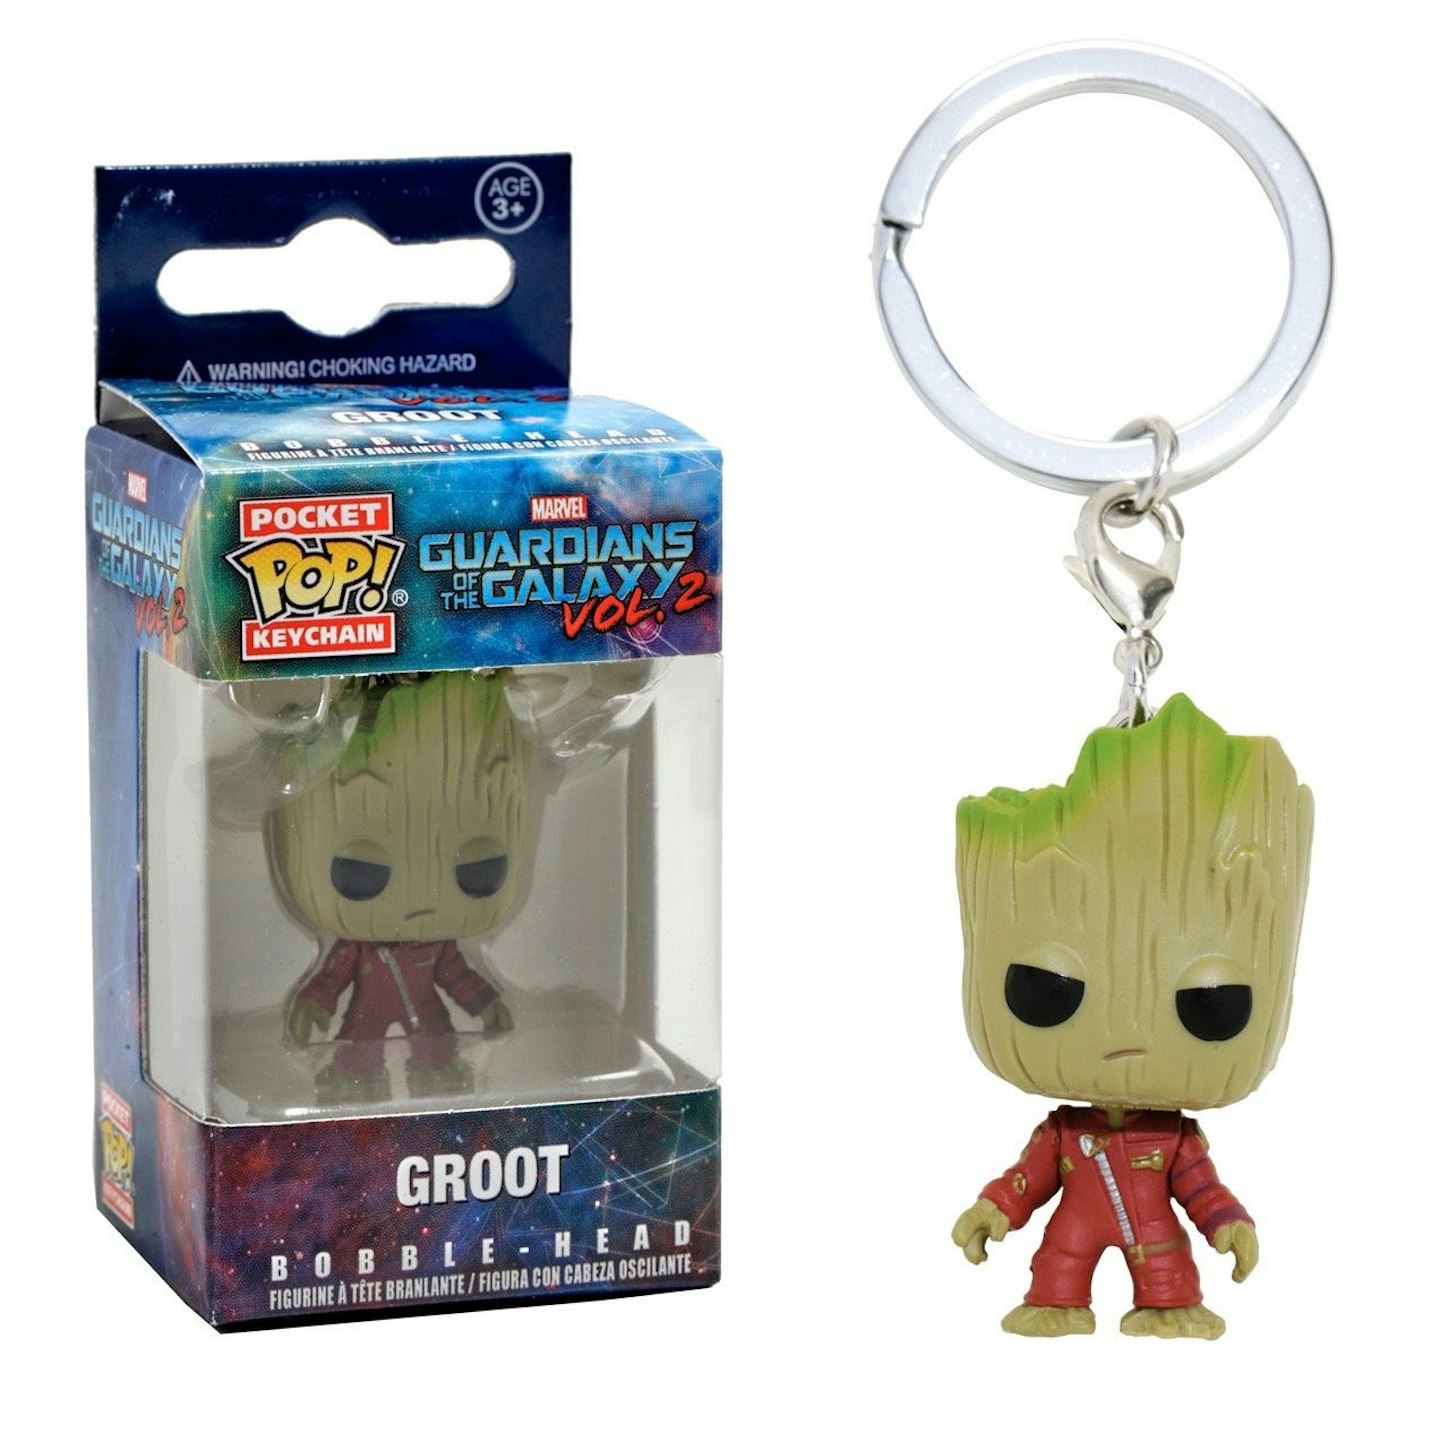 Funko Pocket Pop! Guardians of the Galaxy Vol 2 Marvel Ravager Groot Keychain, £6.43